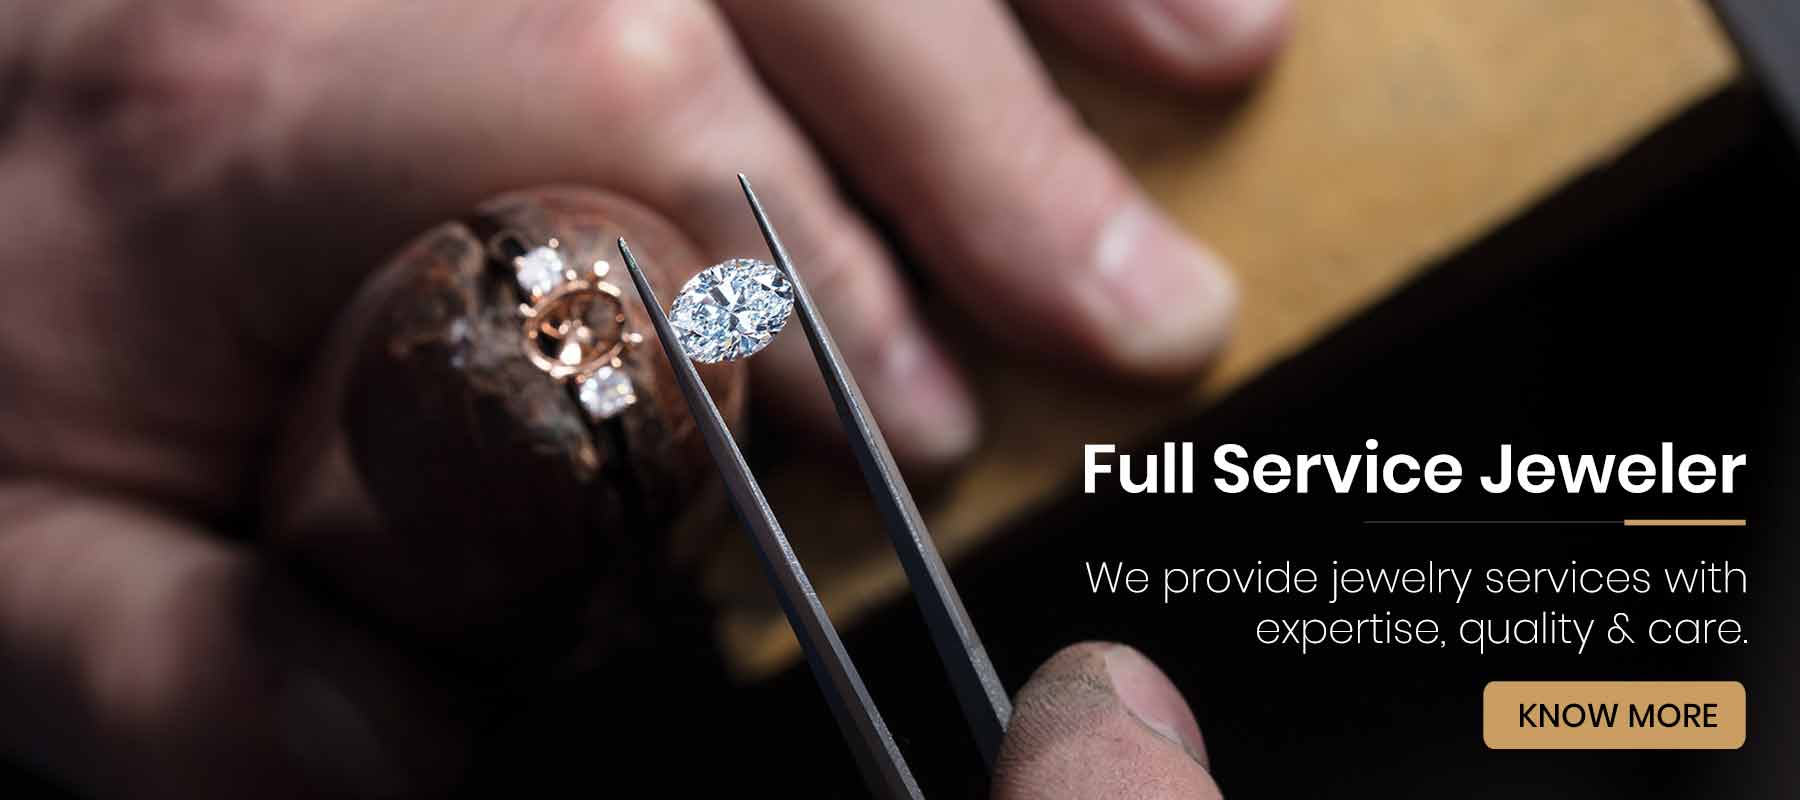 Zembar Jewelers Is A Full Service Jewelry Store